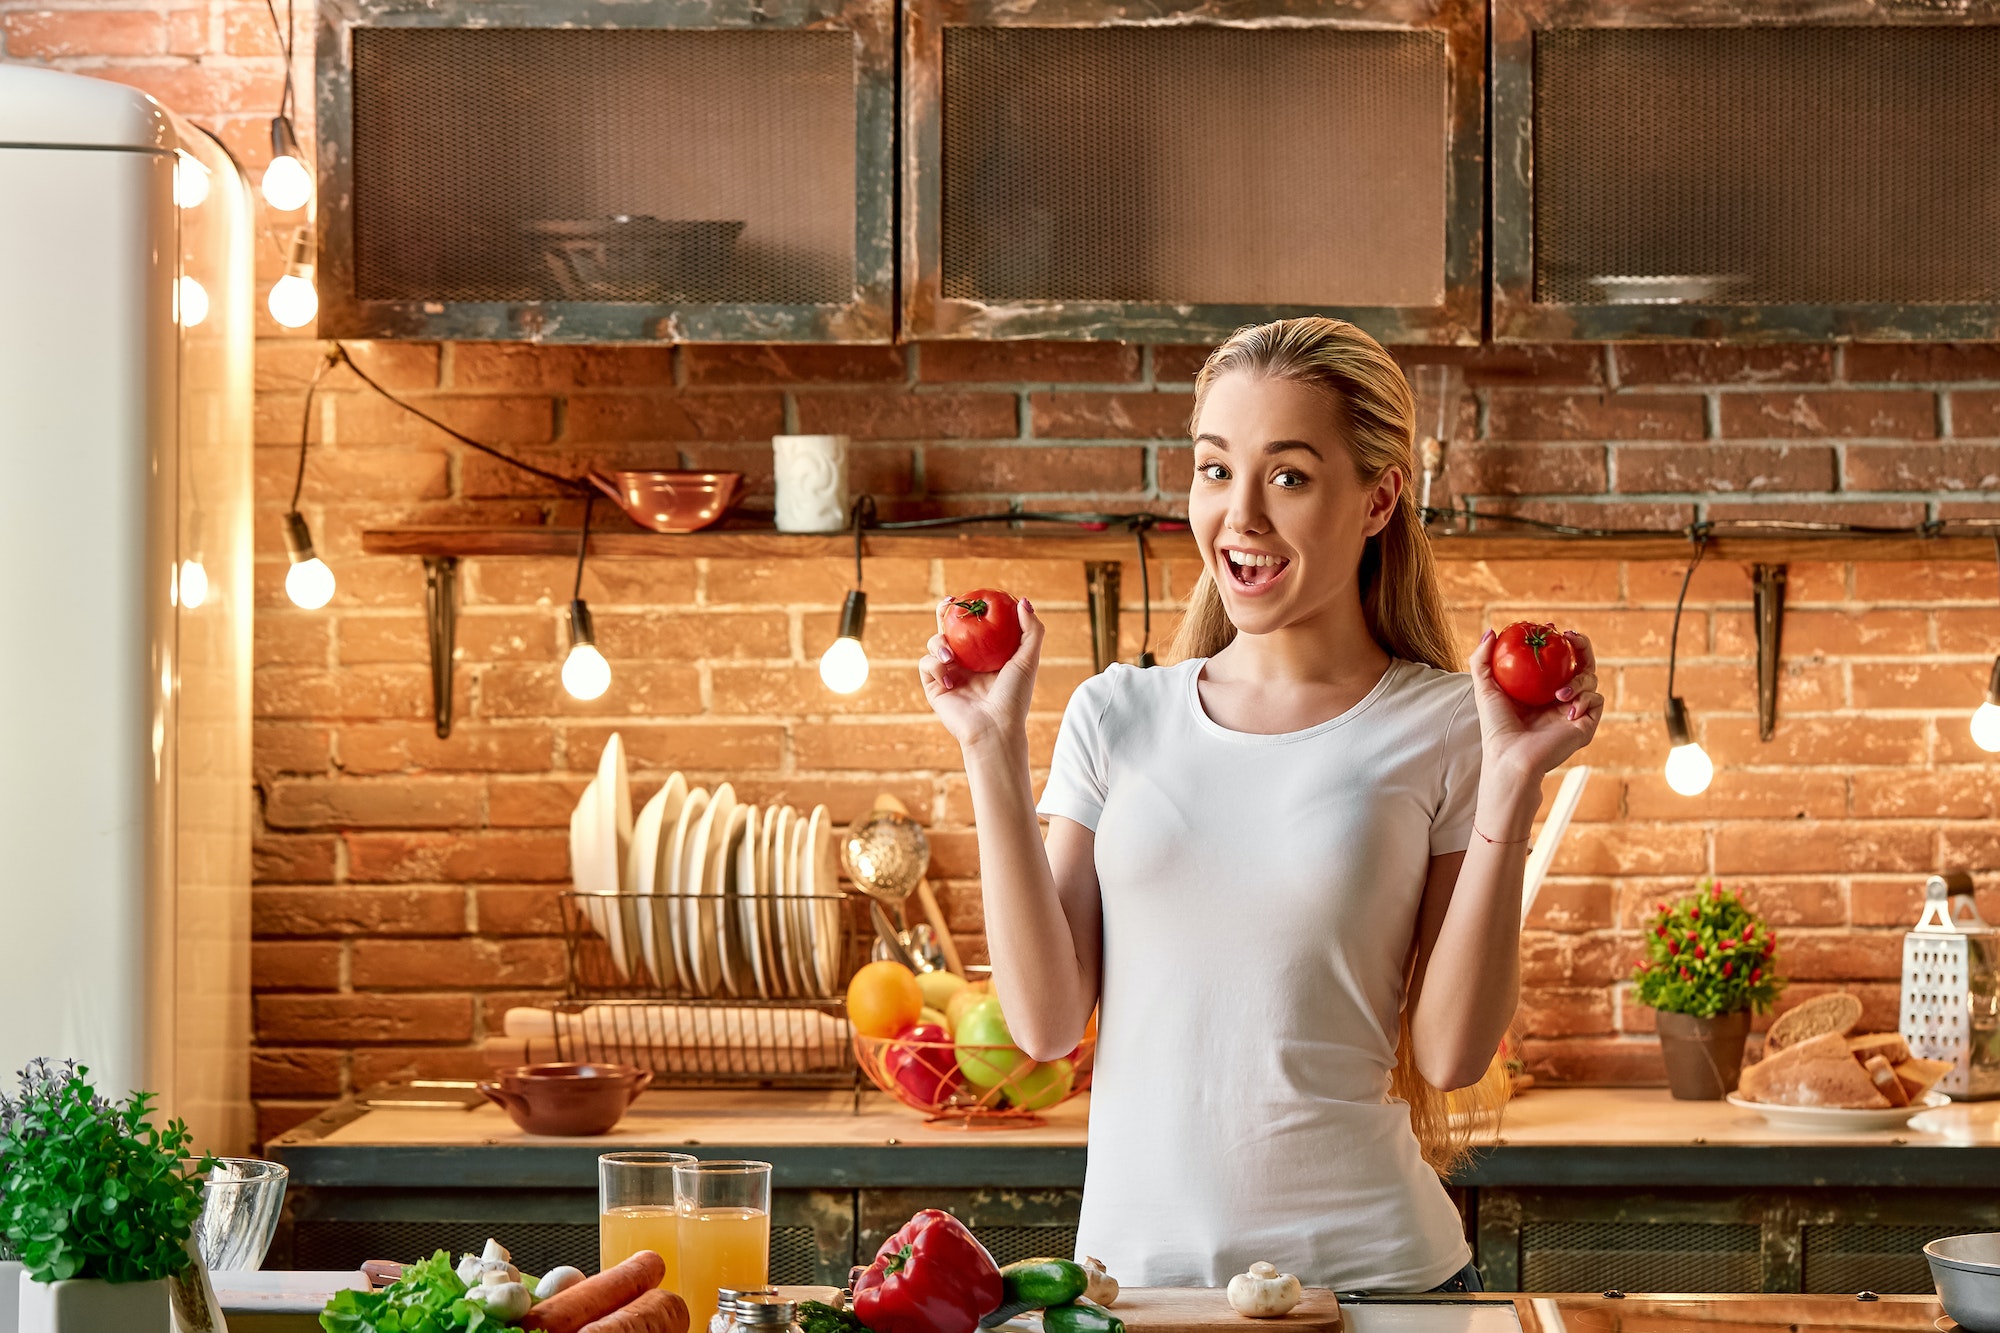 Culinary and Cooking Wellness Retreats, young woman cooking vegetables in modern kitchen. Cozy interior